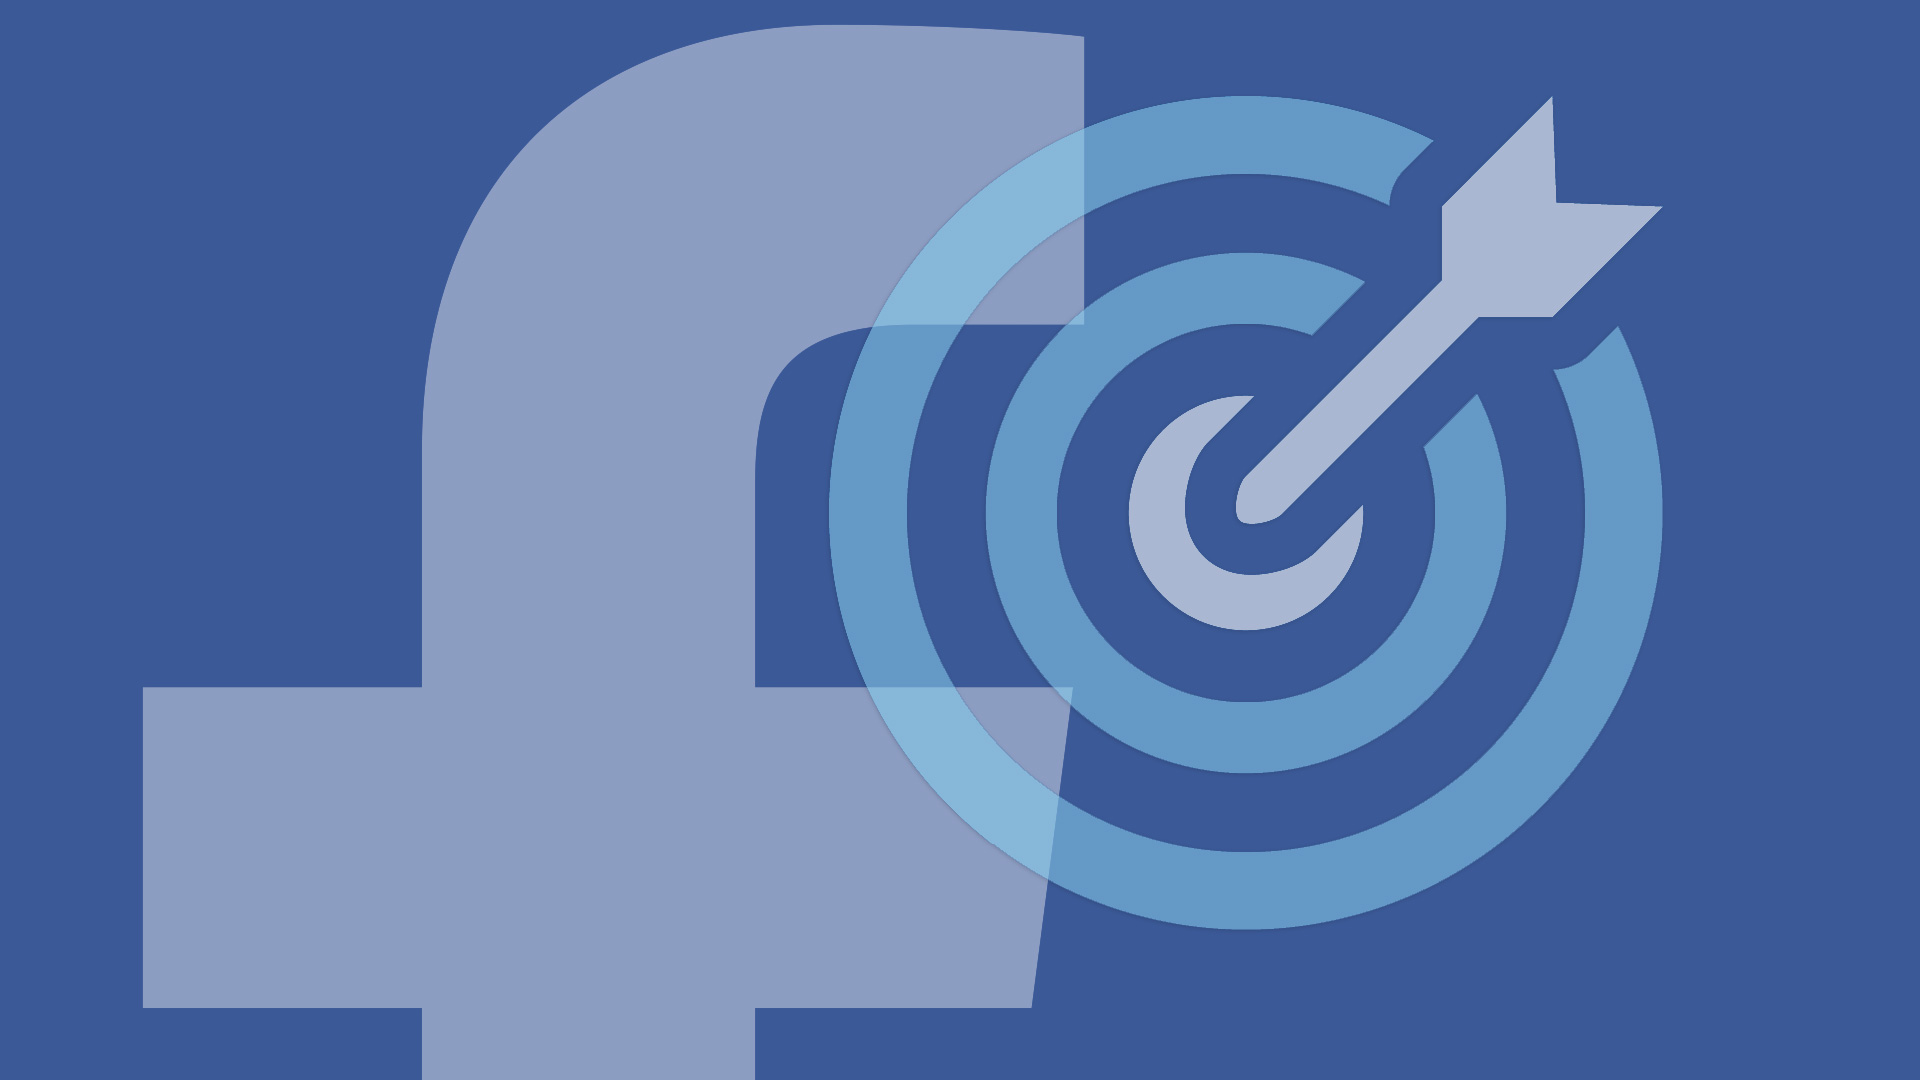 Hit your desired goal with Facebook target marketing.